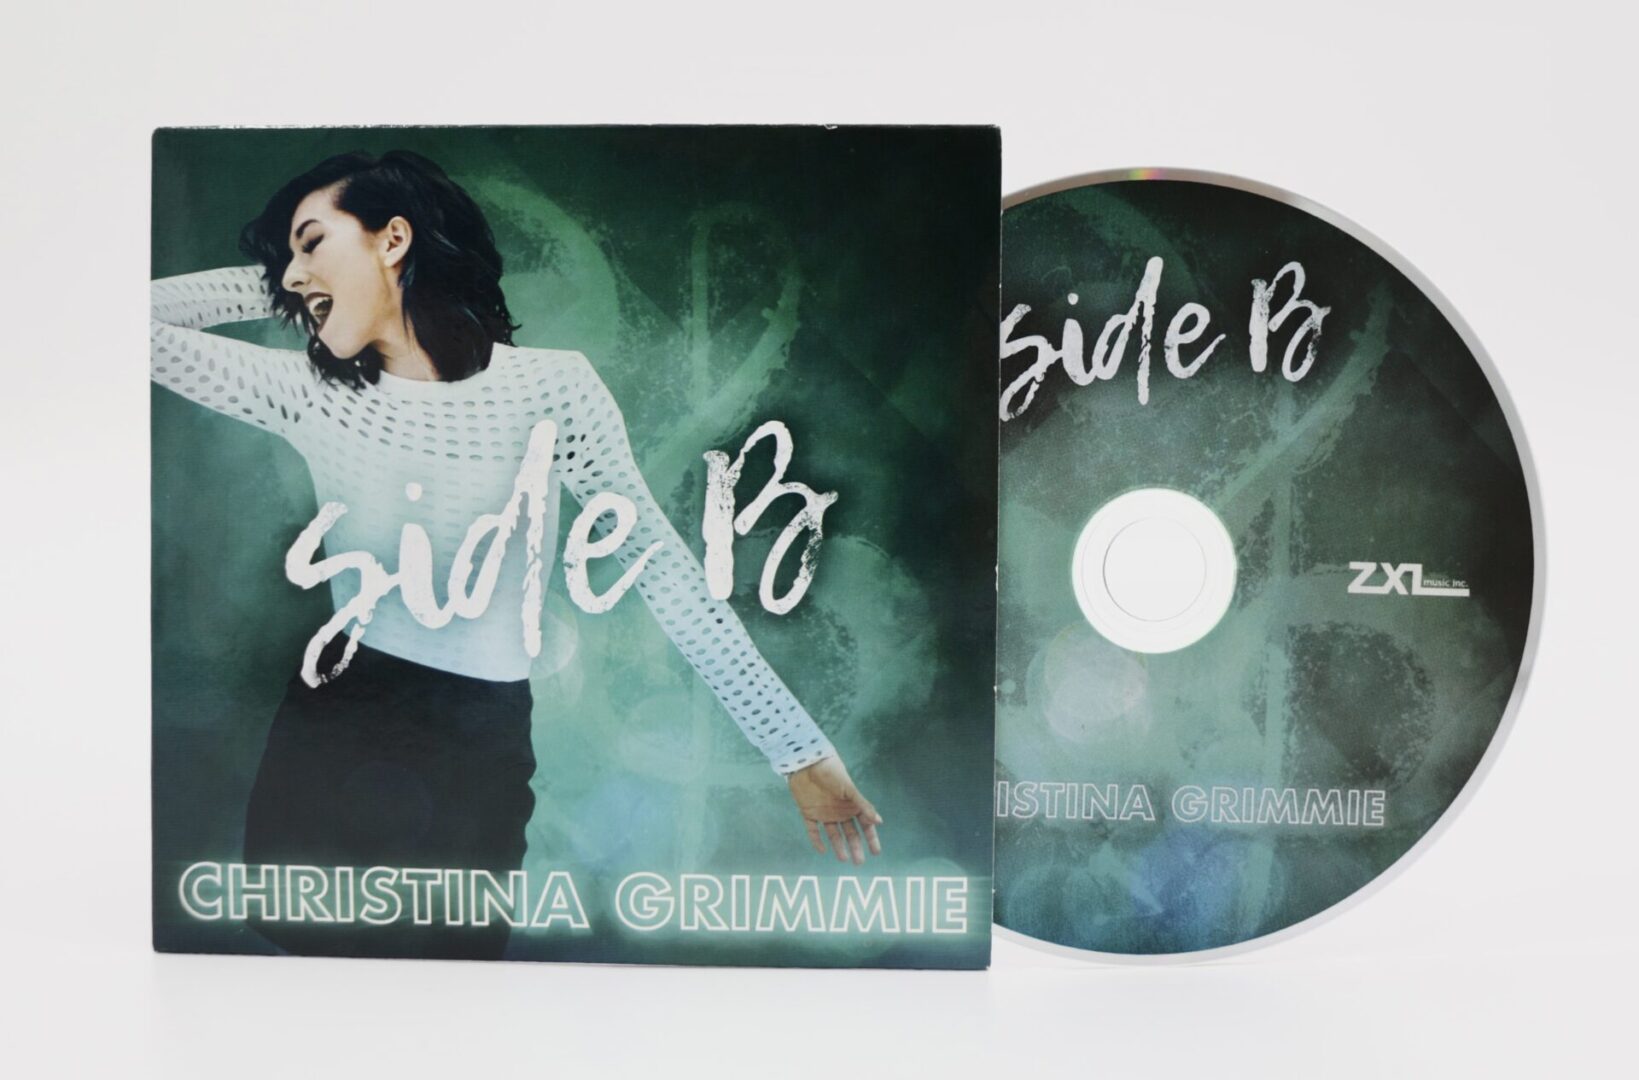 Thumbnail of CD and album cover of Christina Grimmie’s Side B